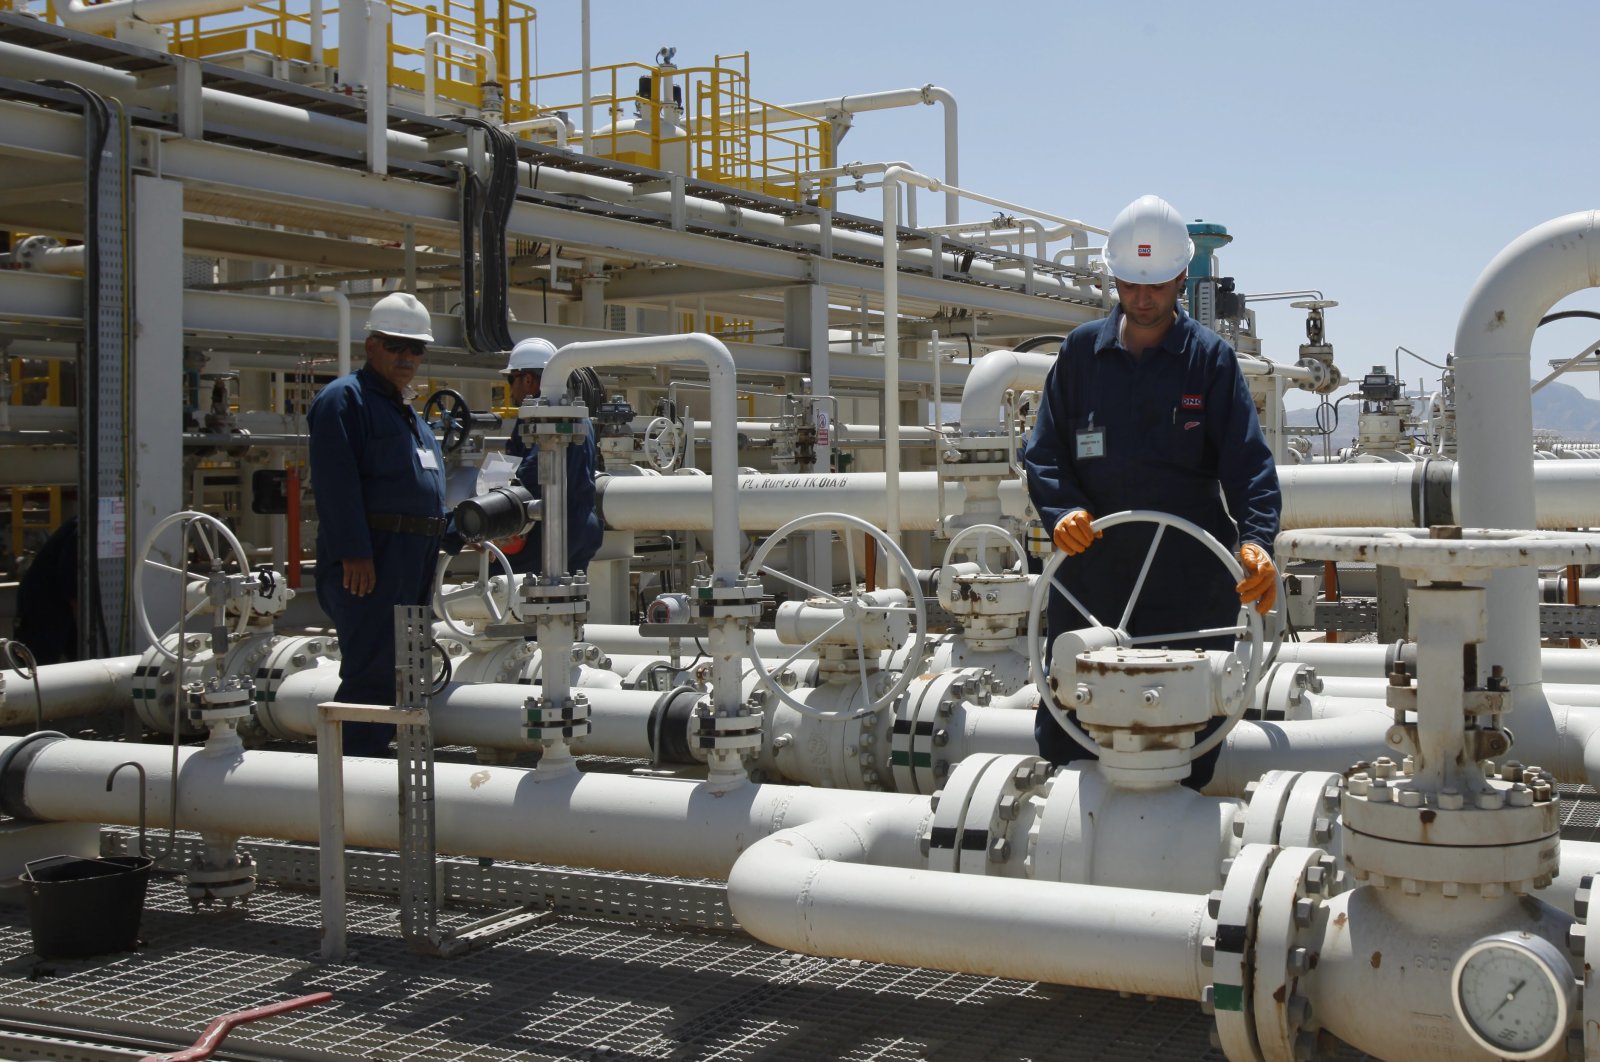 Employees work at the Tawke oil field in the Kurdistan Regional Government (KRG) of northern Iraq, May 31, 2009. (AP Photo)